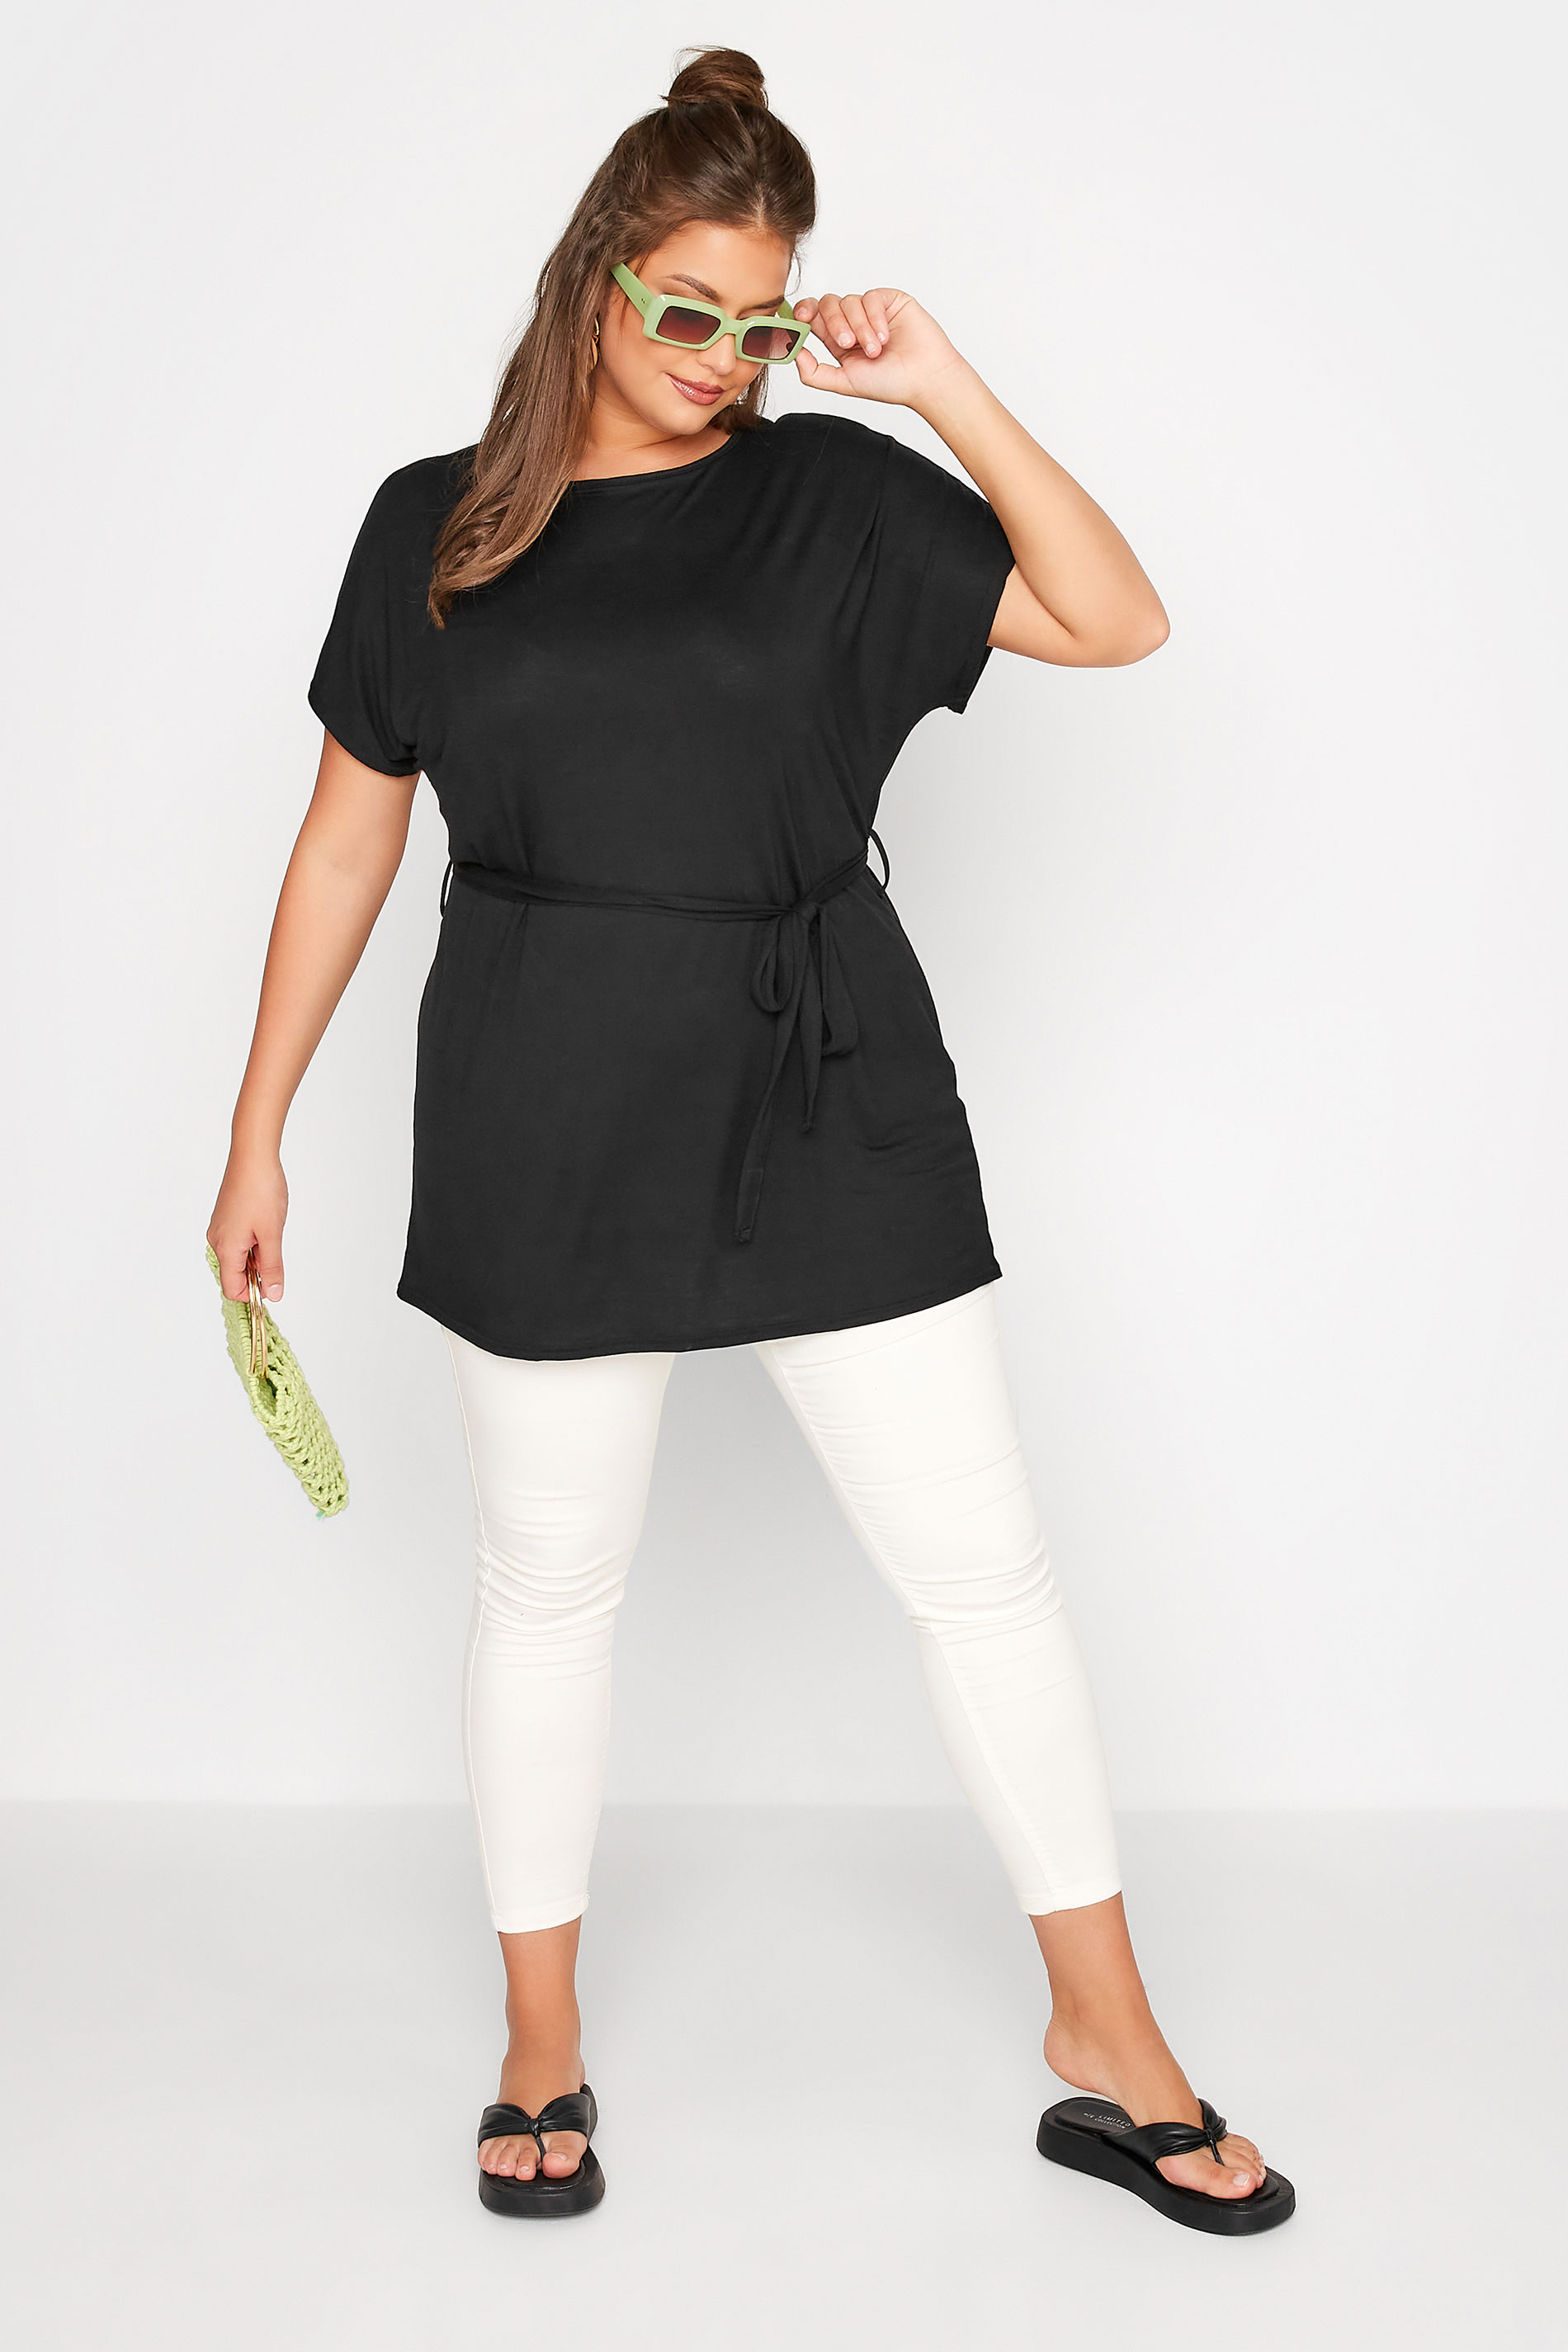 Grande taille  Tops Grande taille  Tops Casual | LIMITED COLLECTION Curve Black Waist Tie Top - PR12022